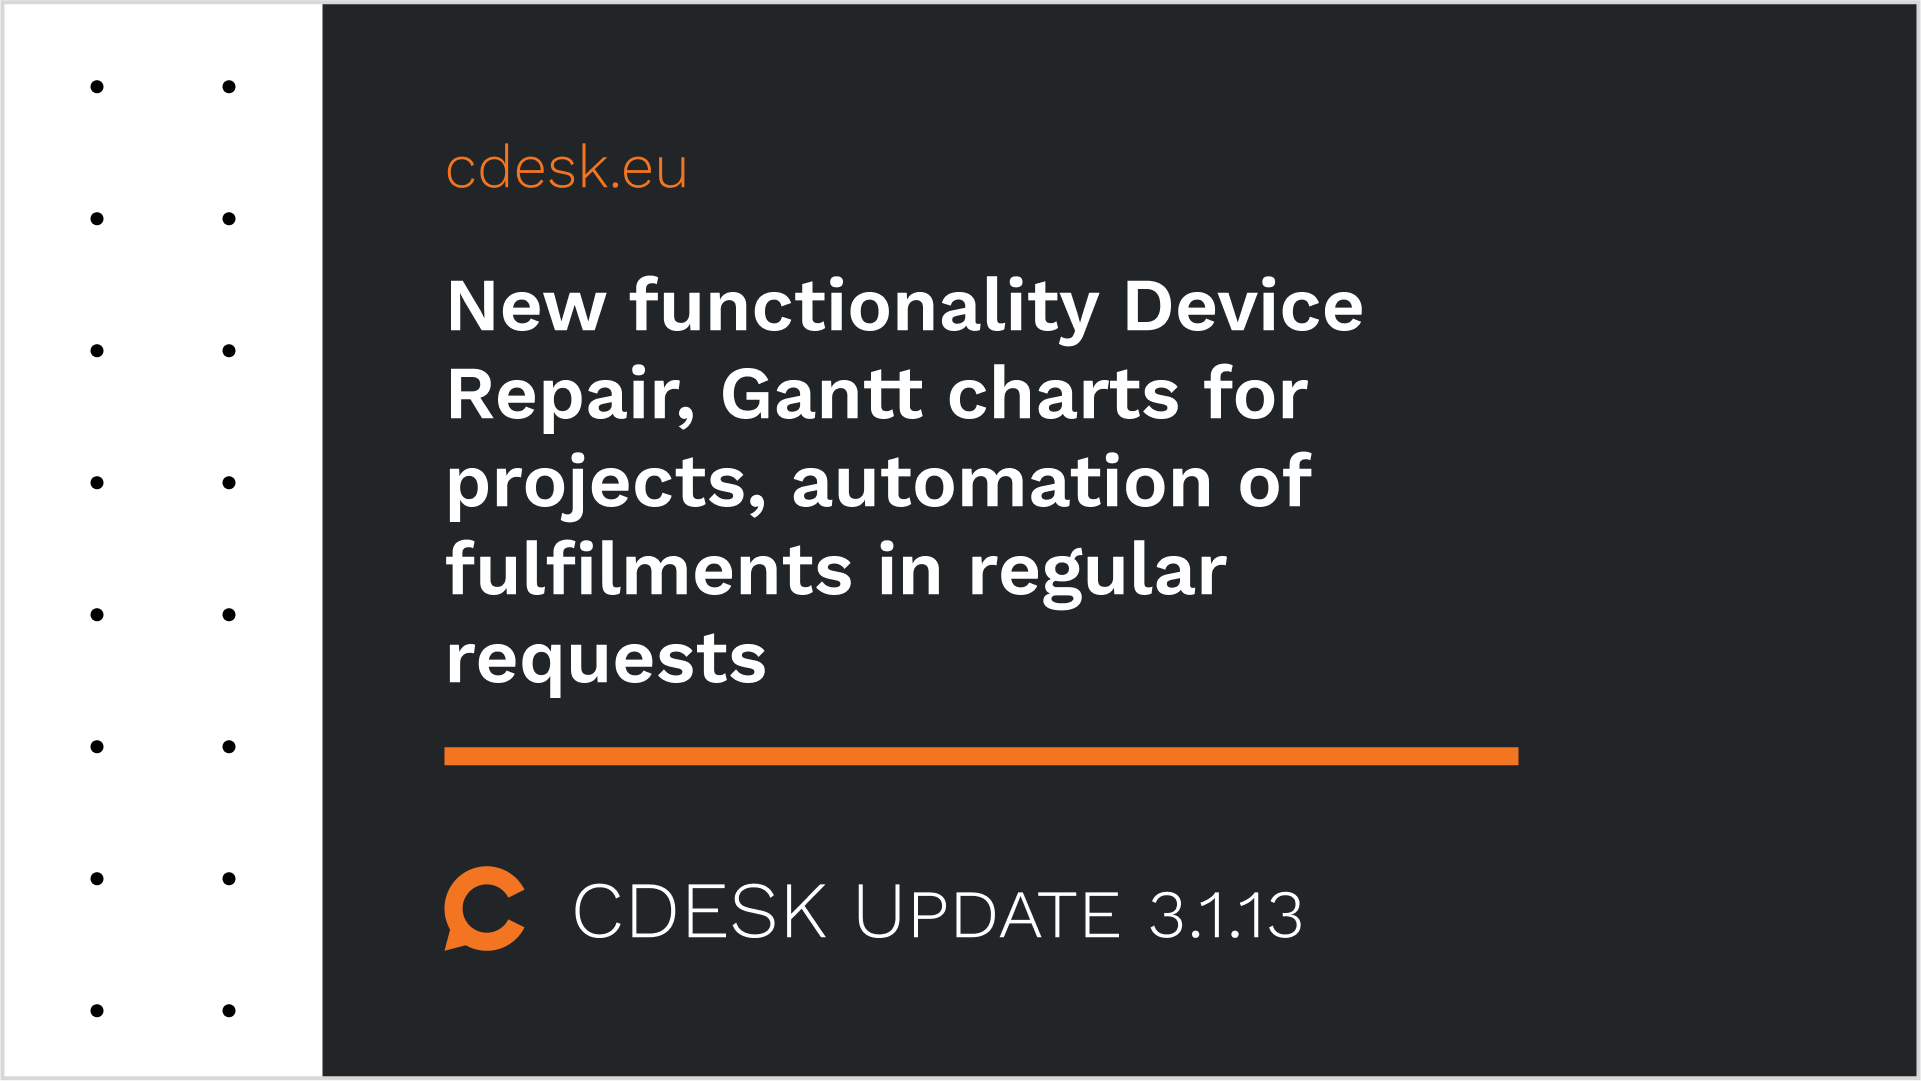 New functionality Device Repair, Gantt charts for projects, automation of fulfilments in regular requests